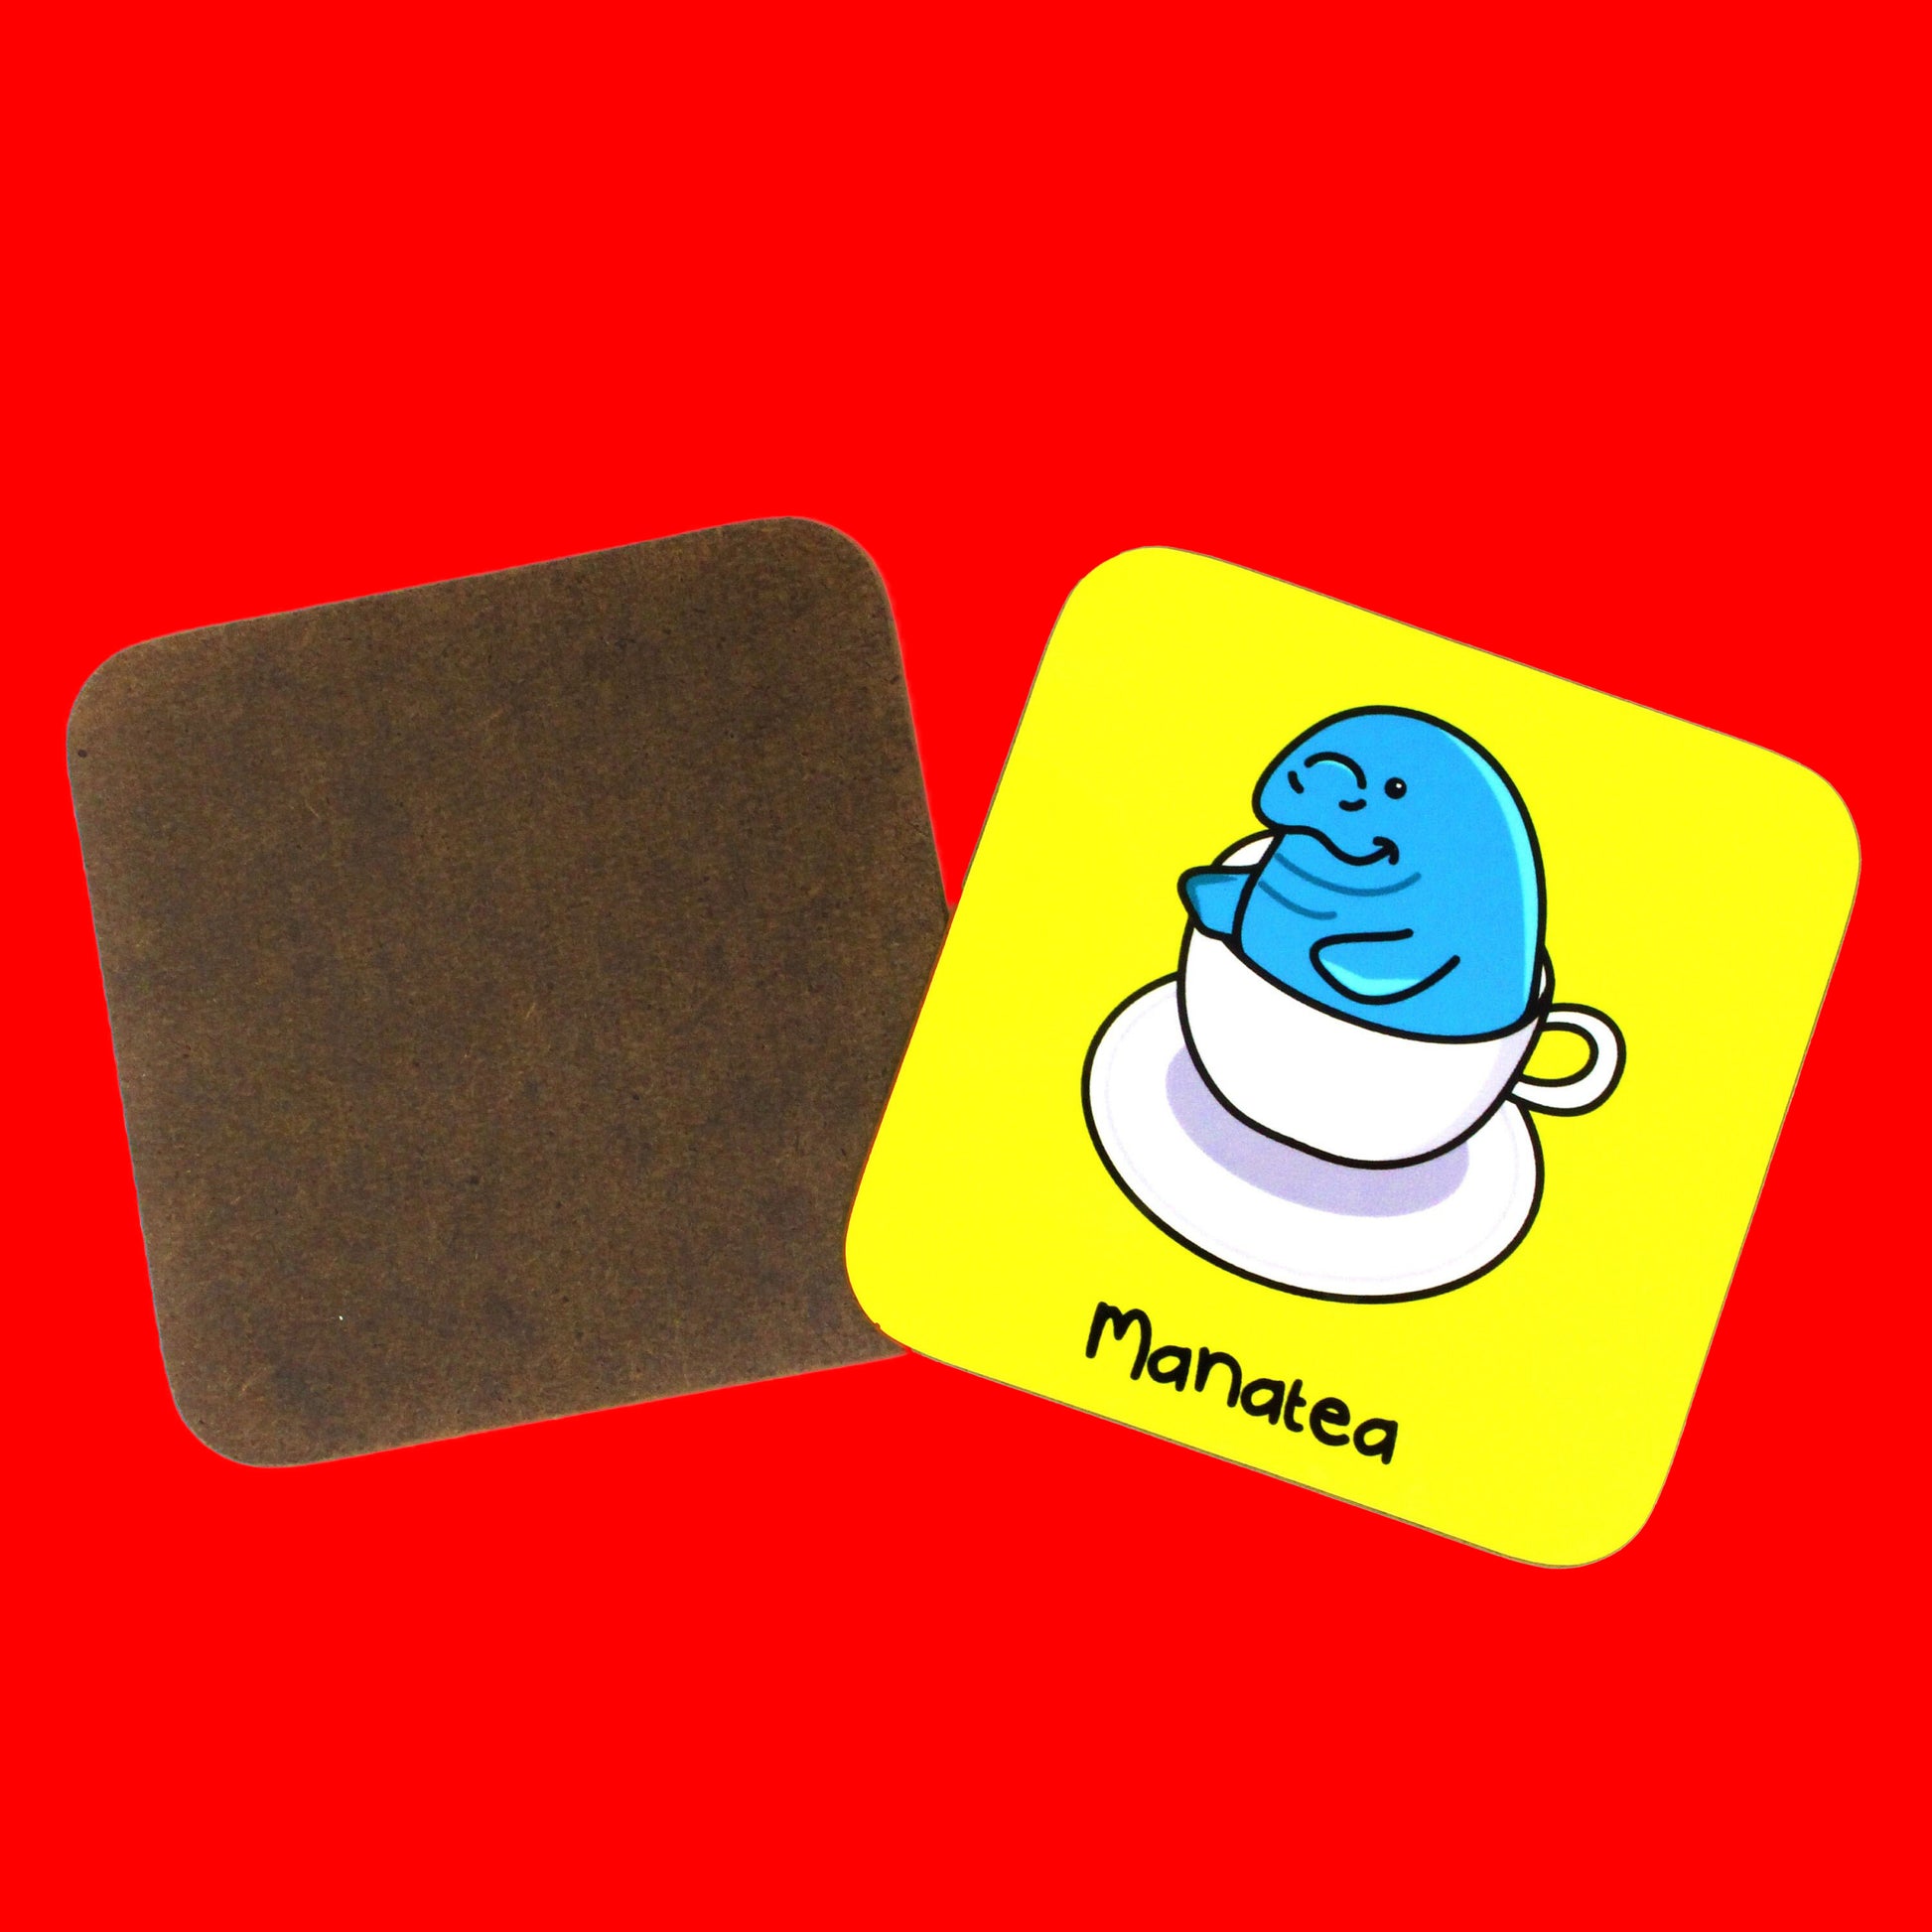 Mana Tea Manatee Coaster on a red background. The bright yellow wooden coaster has an illustration of a smiling manatee sat in a white tea cup on top of a saucer.